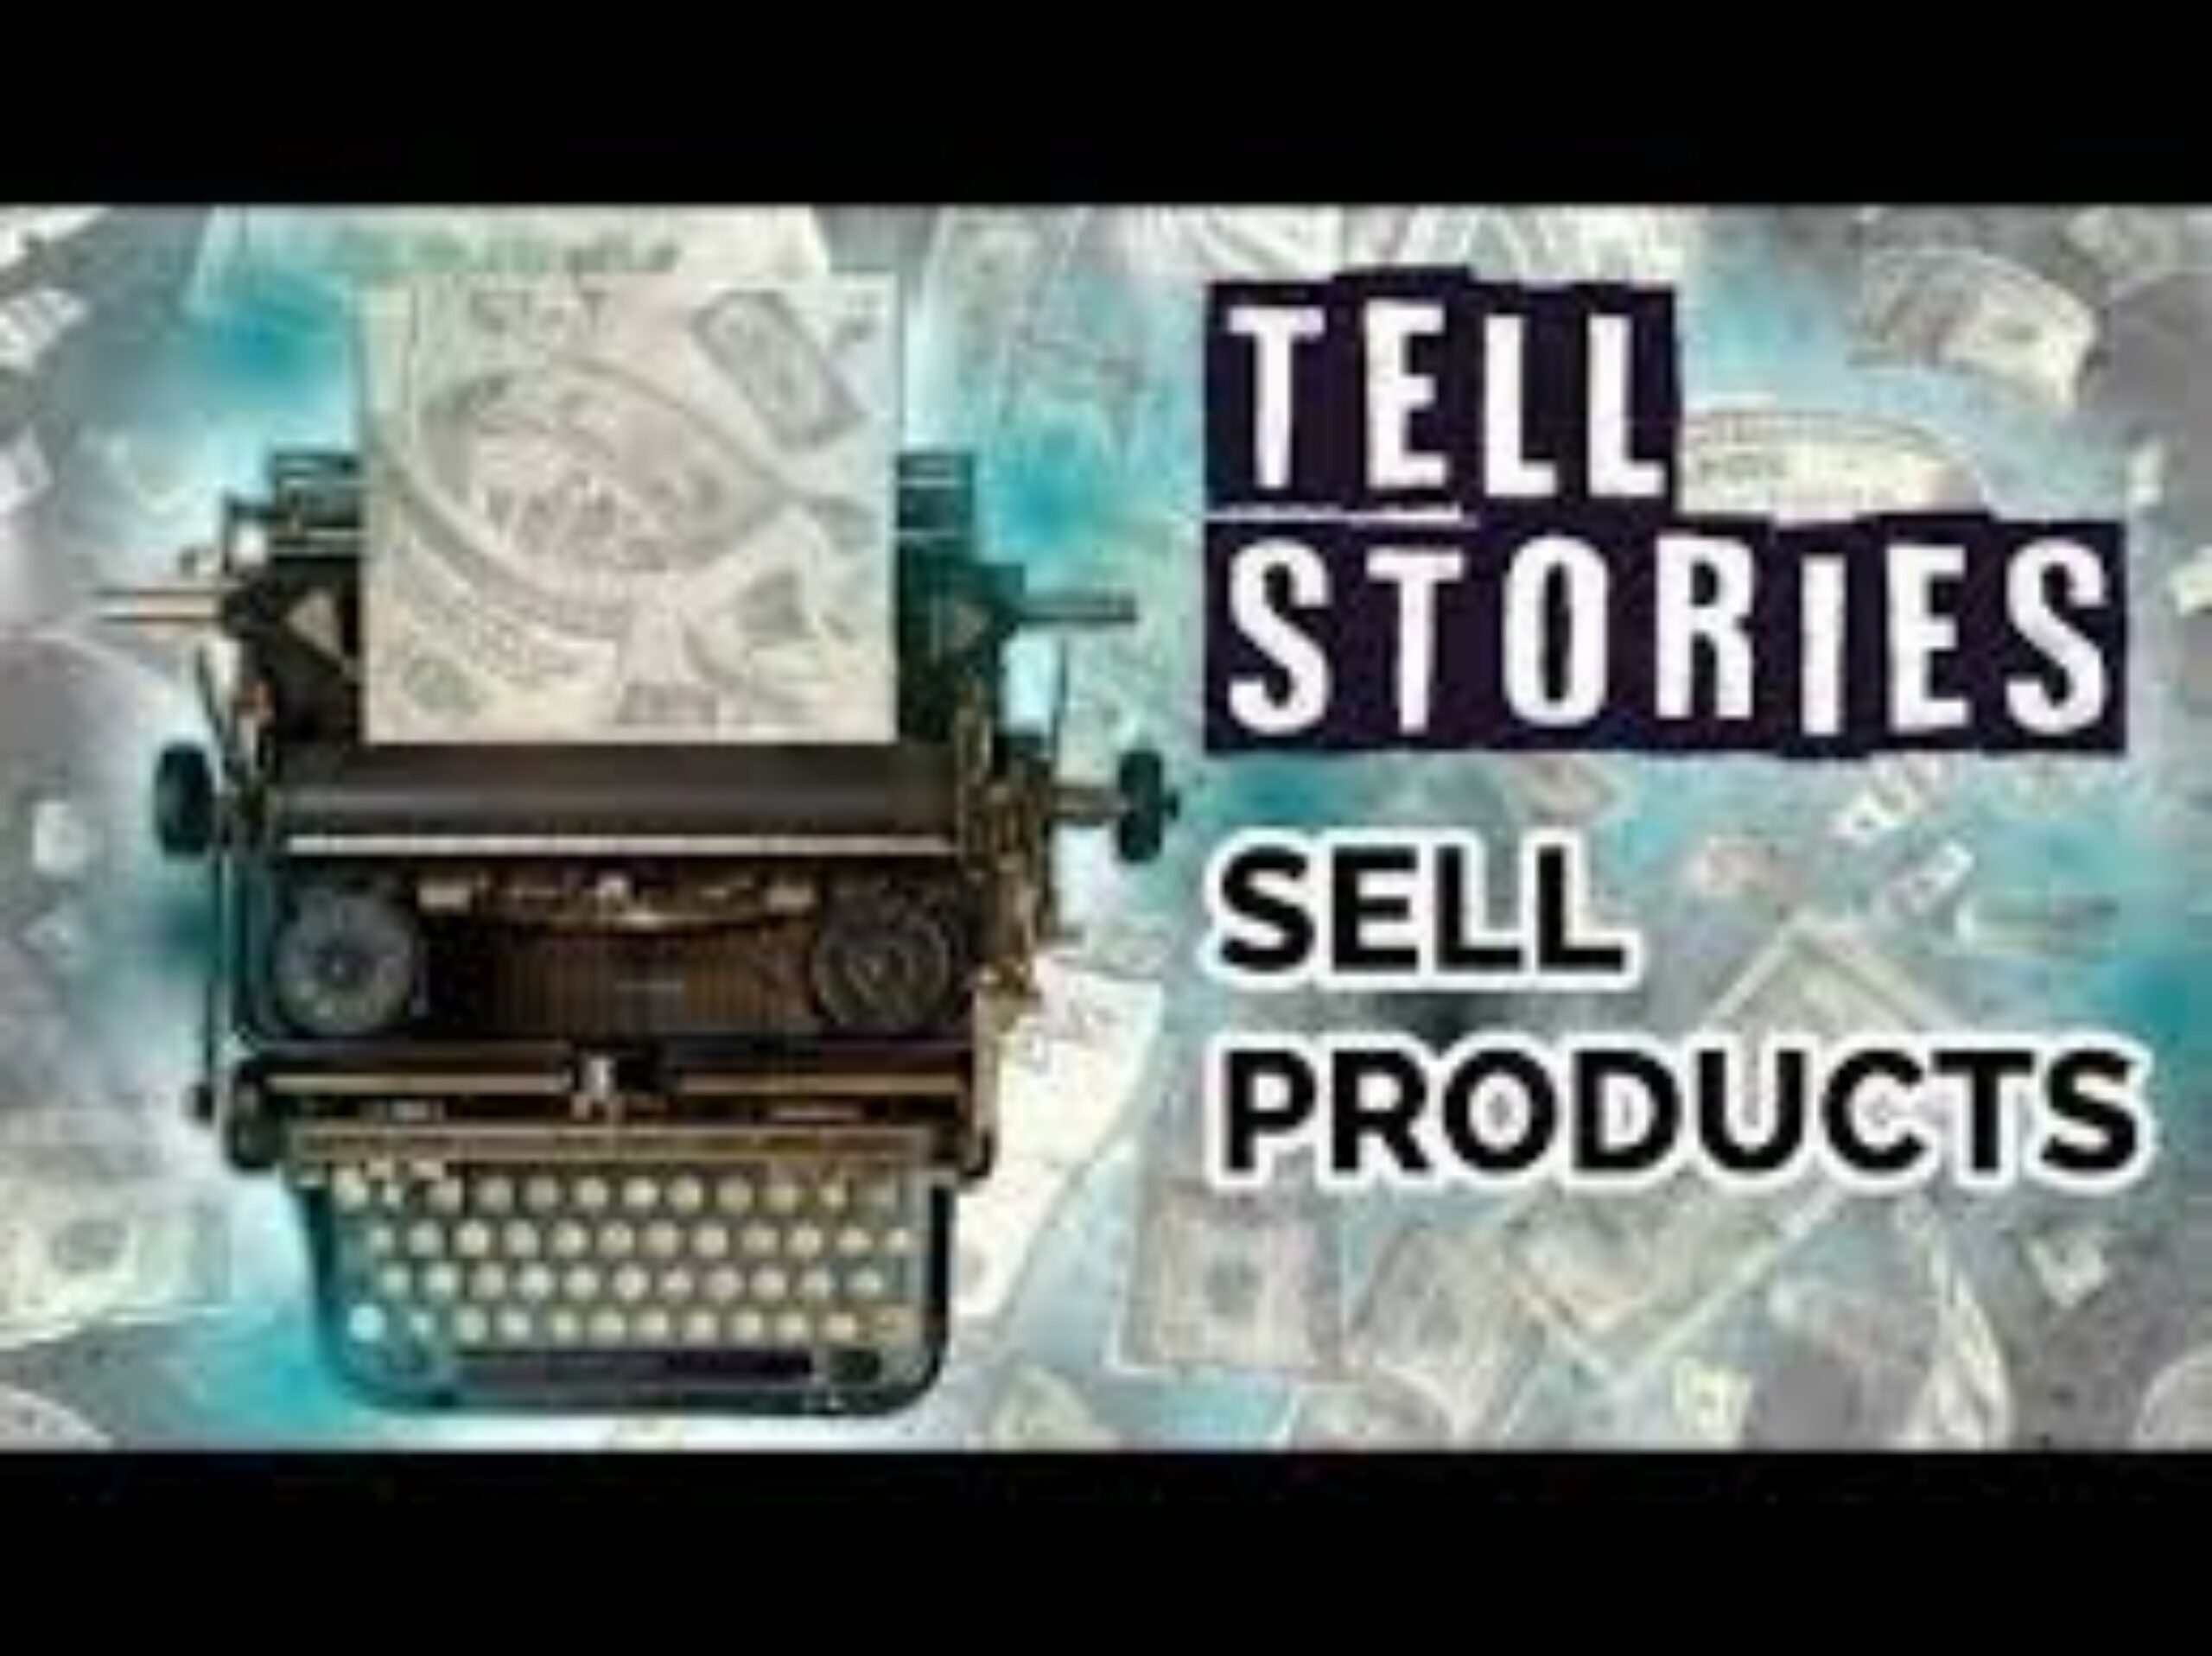 The role of story telling in affiliate marketing